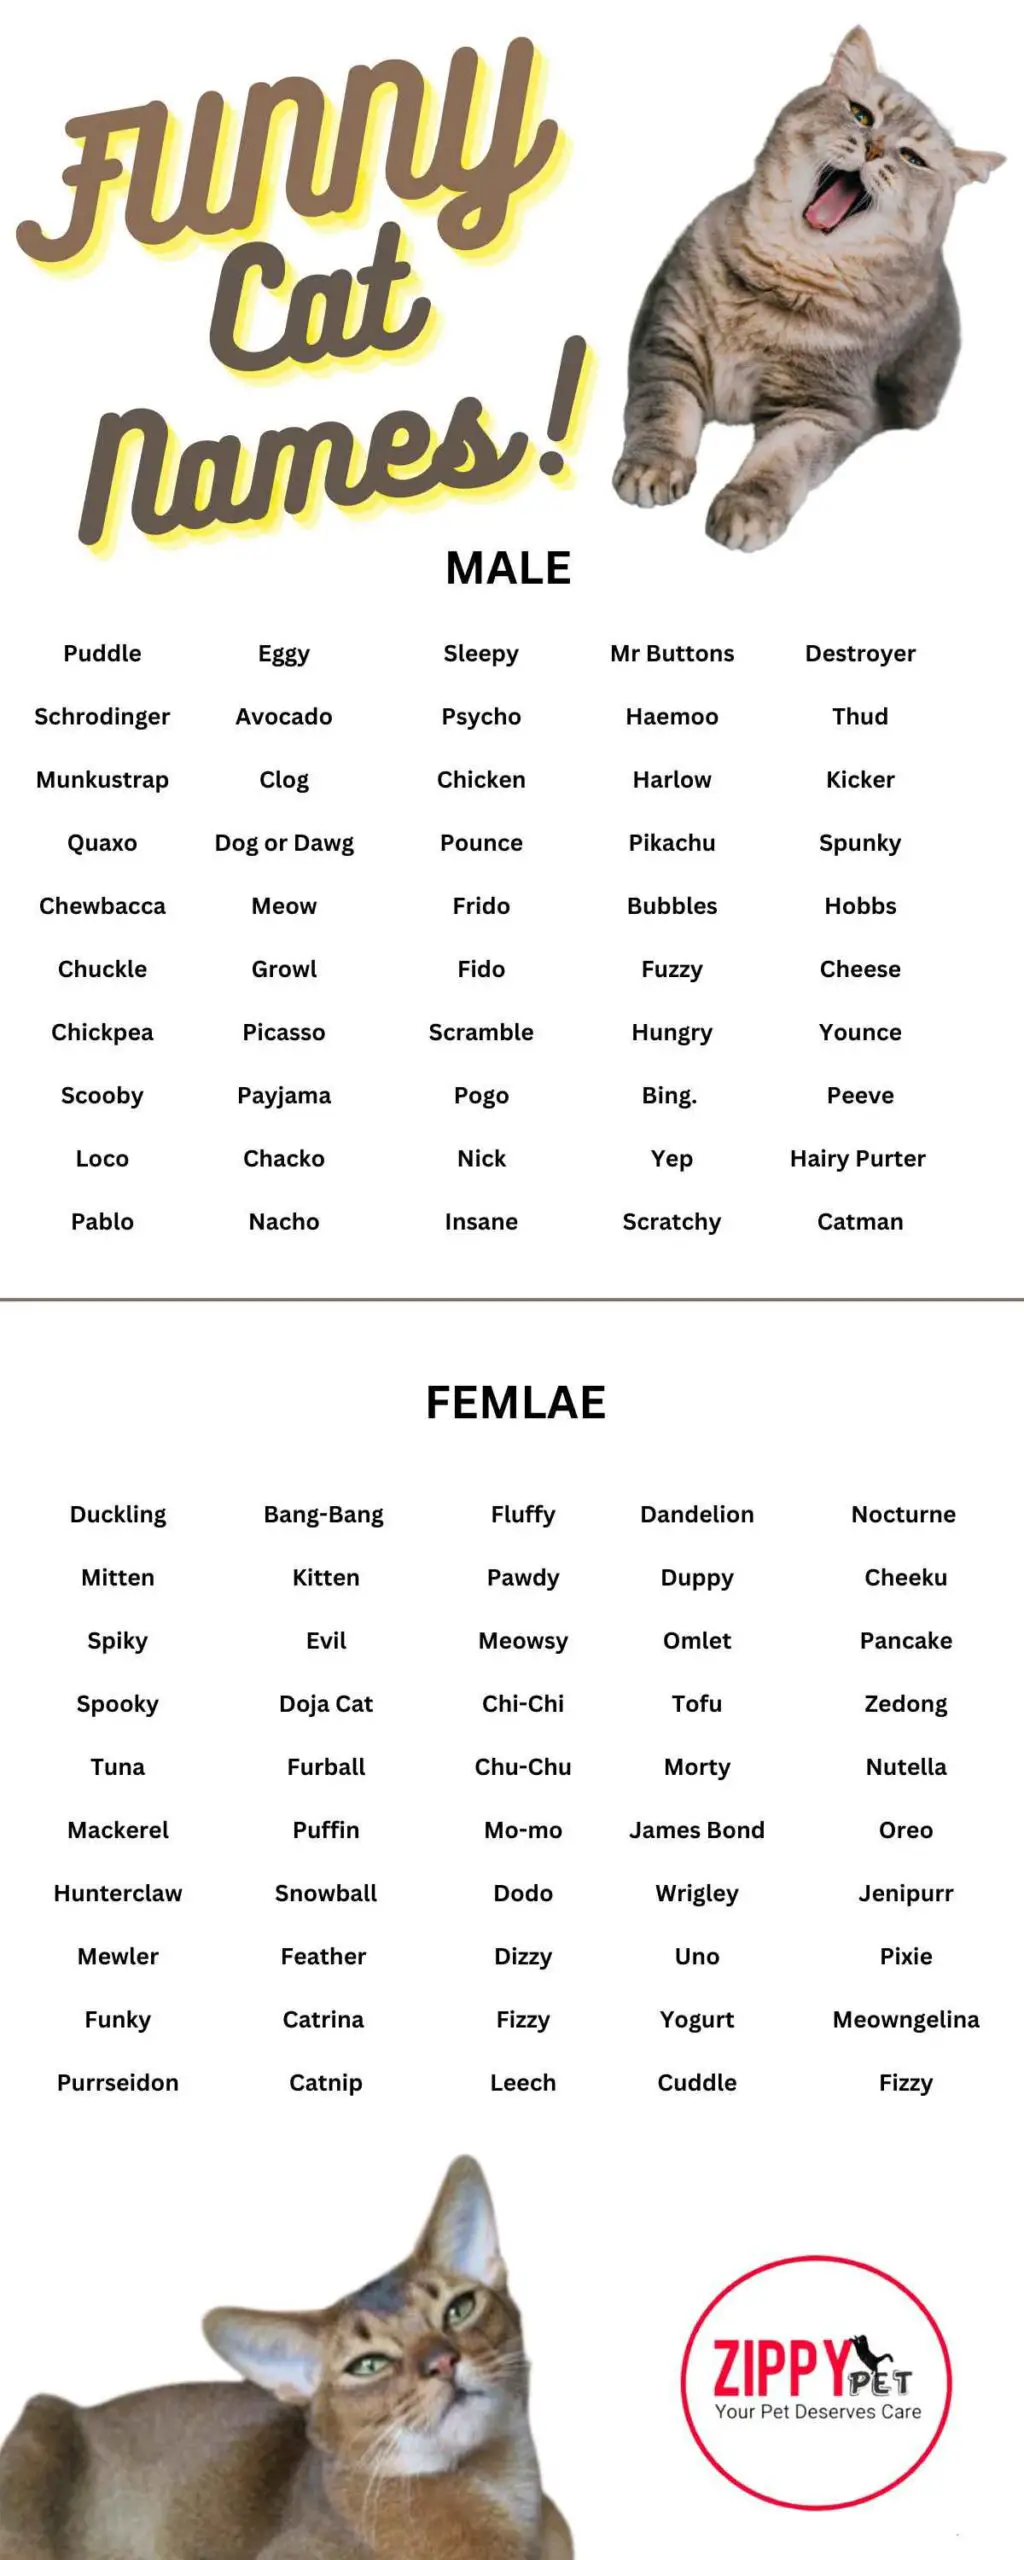 This infographic shows the list of 100 funny names for cats